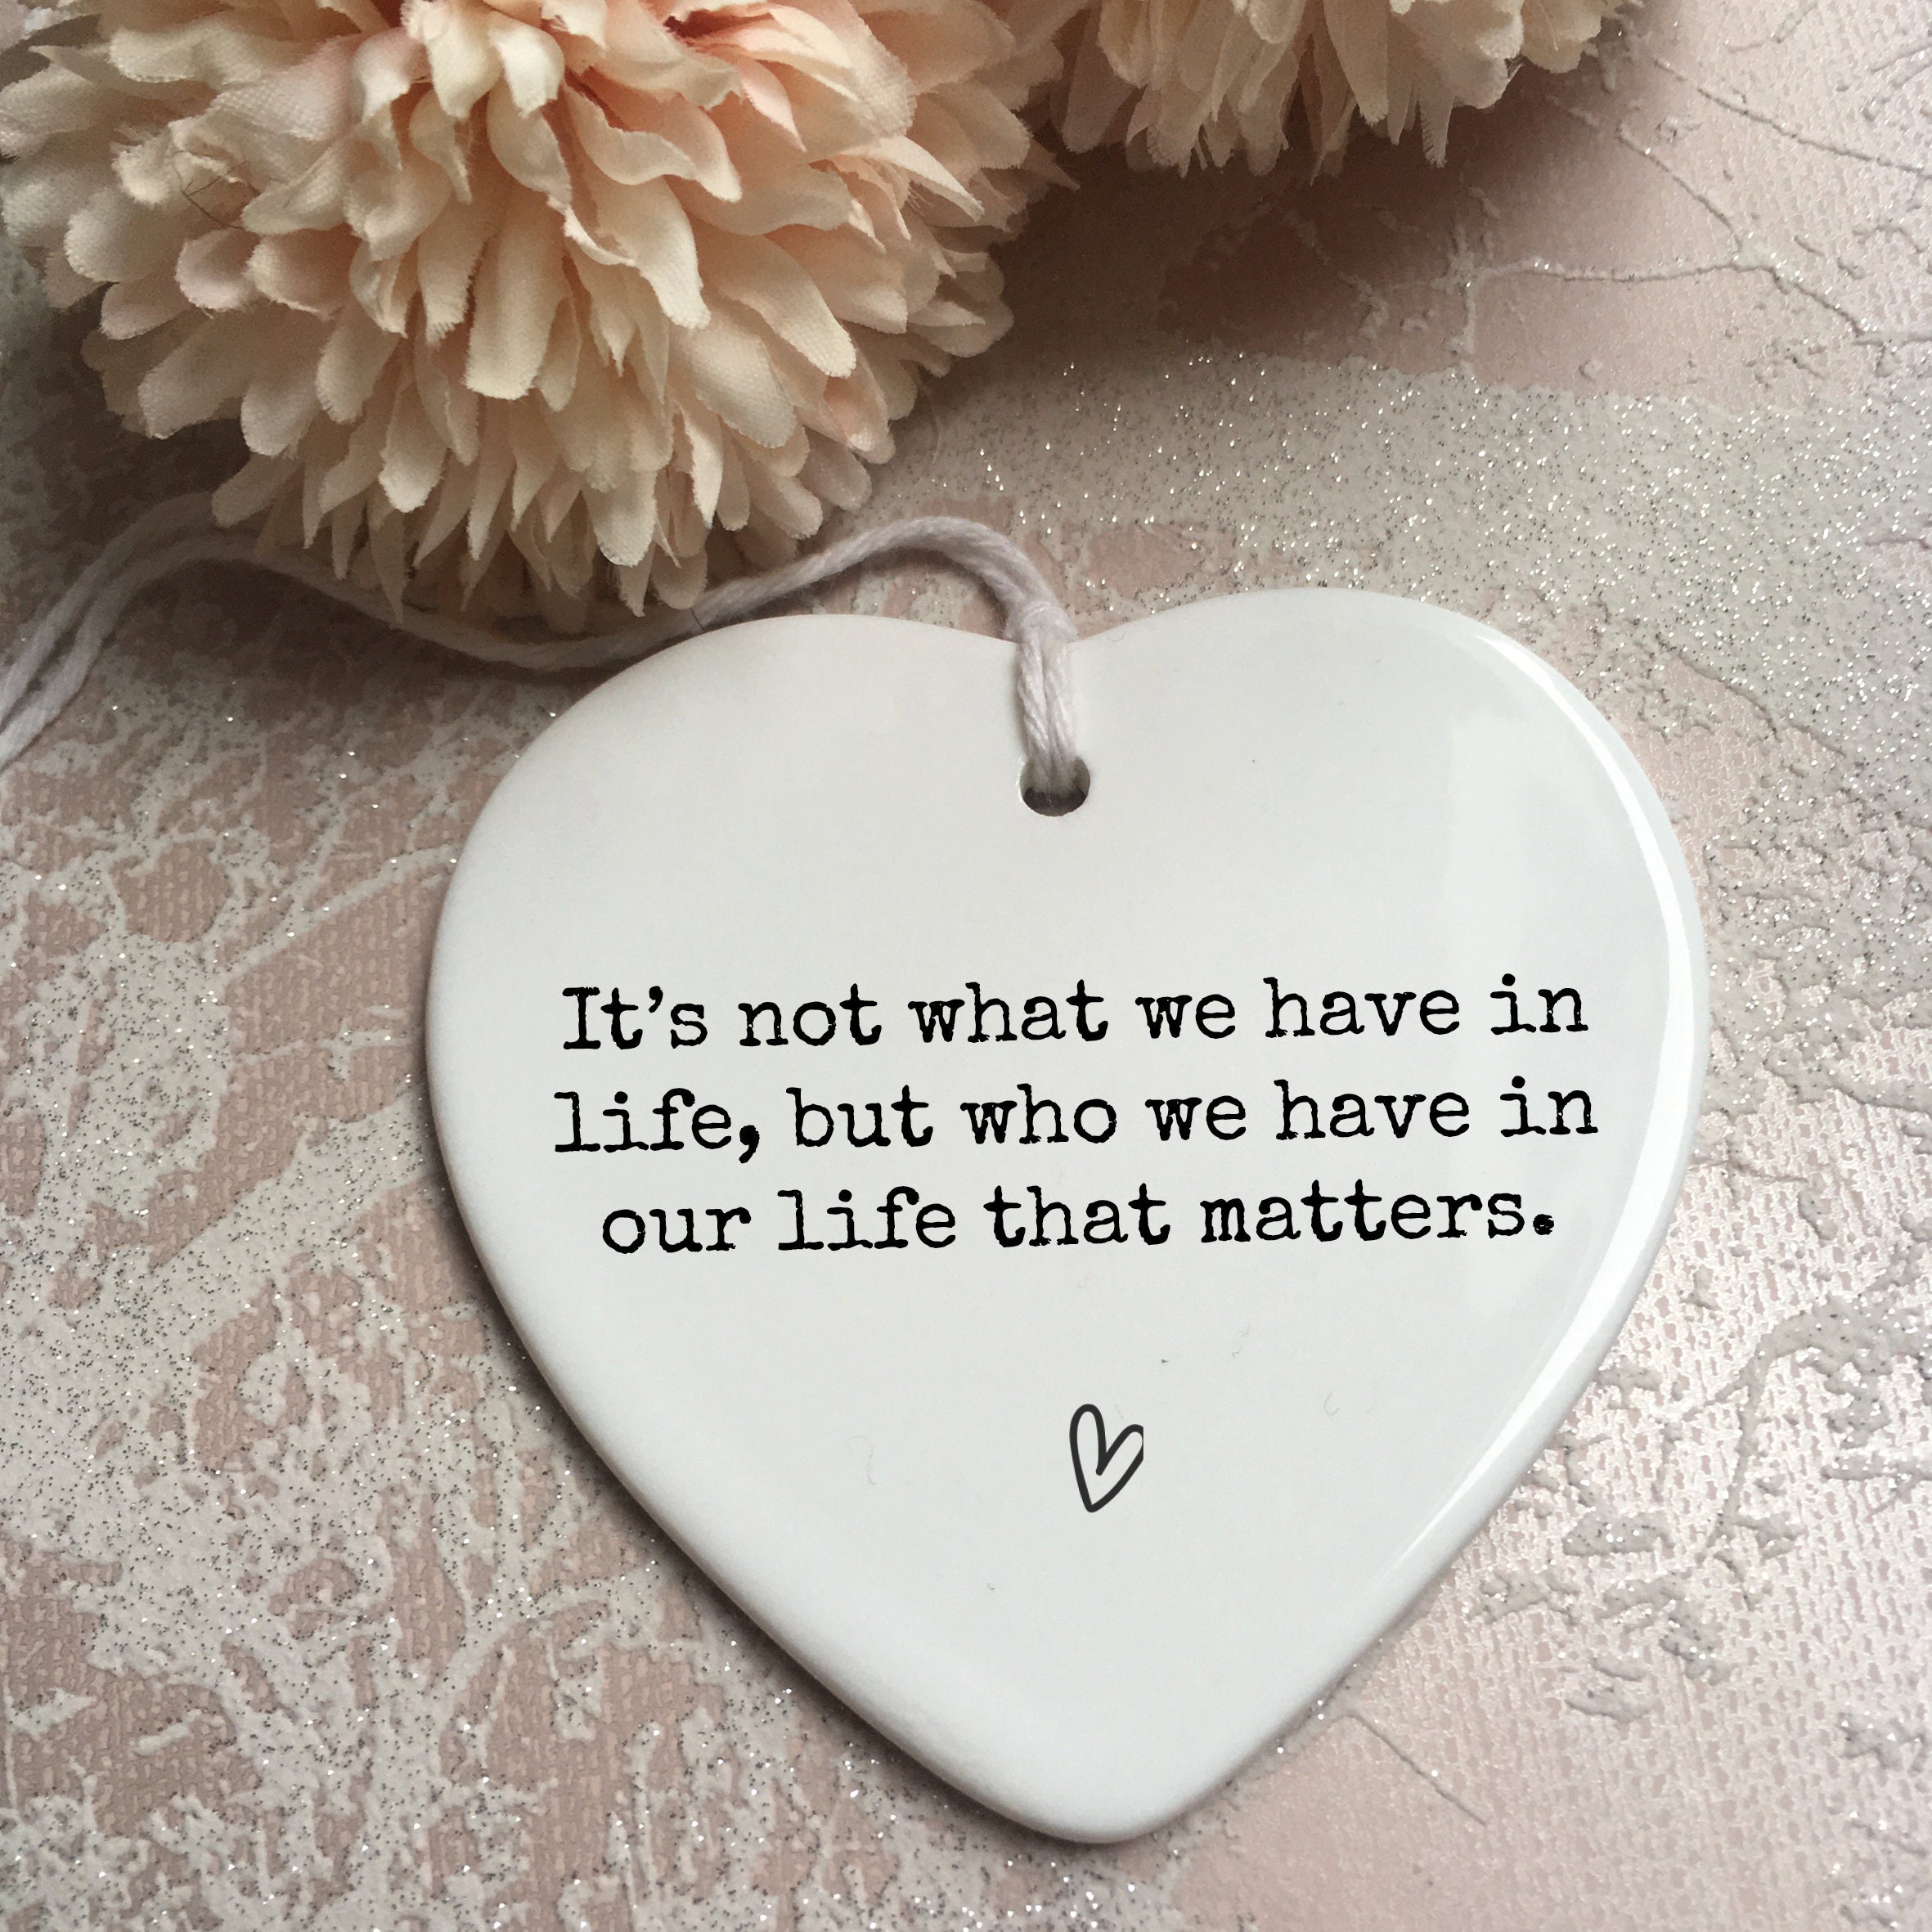 17. Heart Ceramic Decor With Message